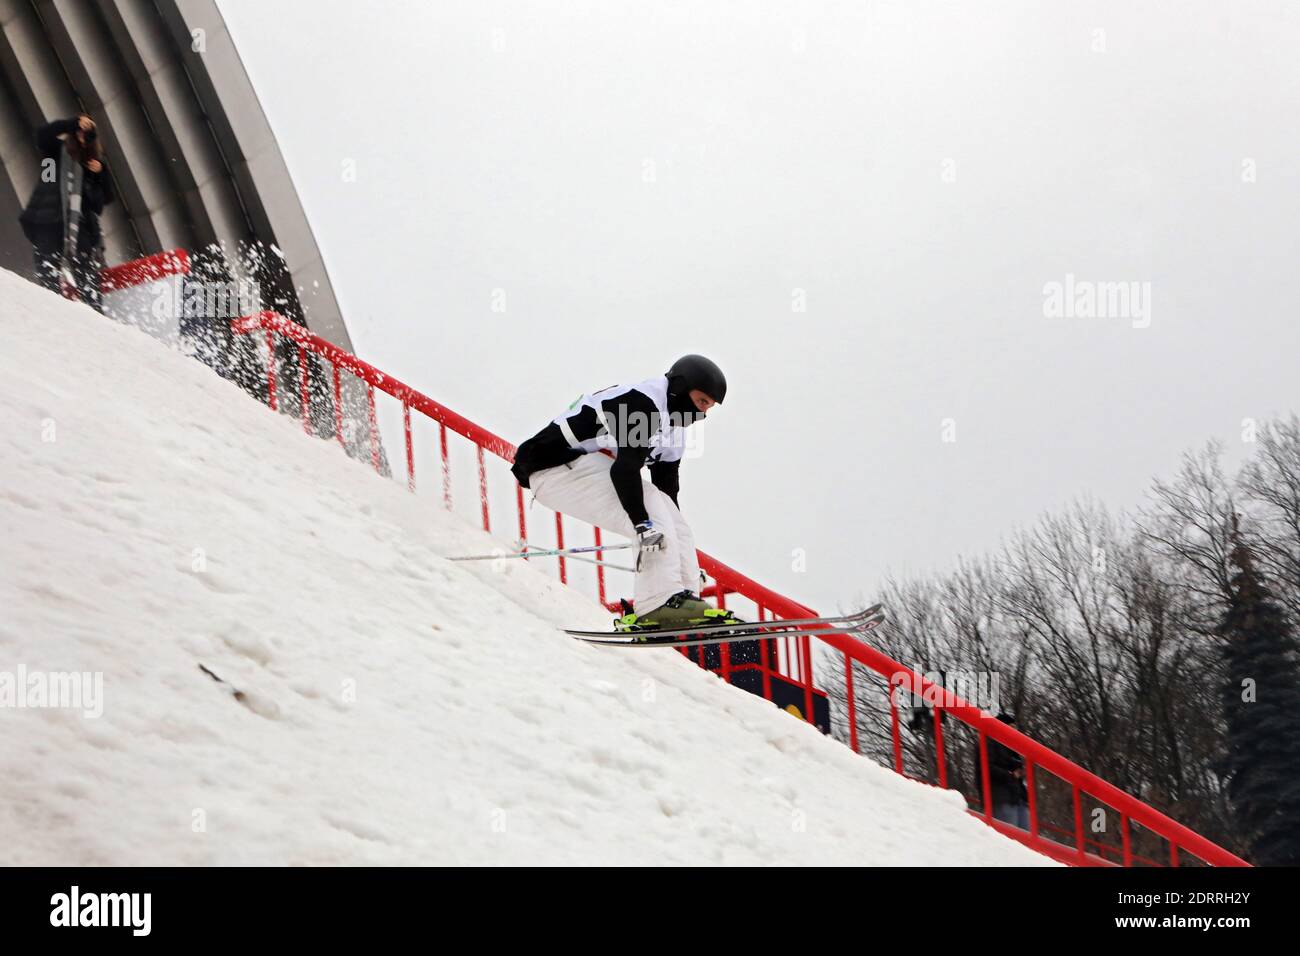 Non Exclusive: KYIV, UKRAINE - DECEMBER 20, 2020 - A freeskier goes down a slope during the Double Triple Snow Fest 2020 at the Friendship of the Nati Stock Photo